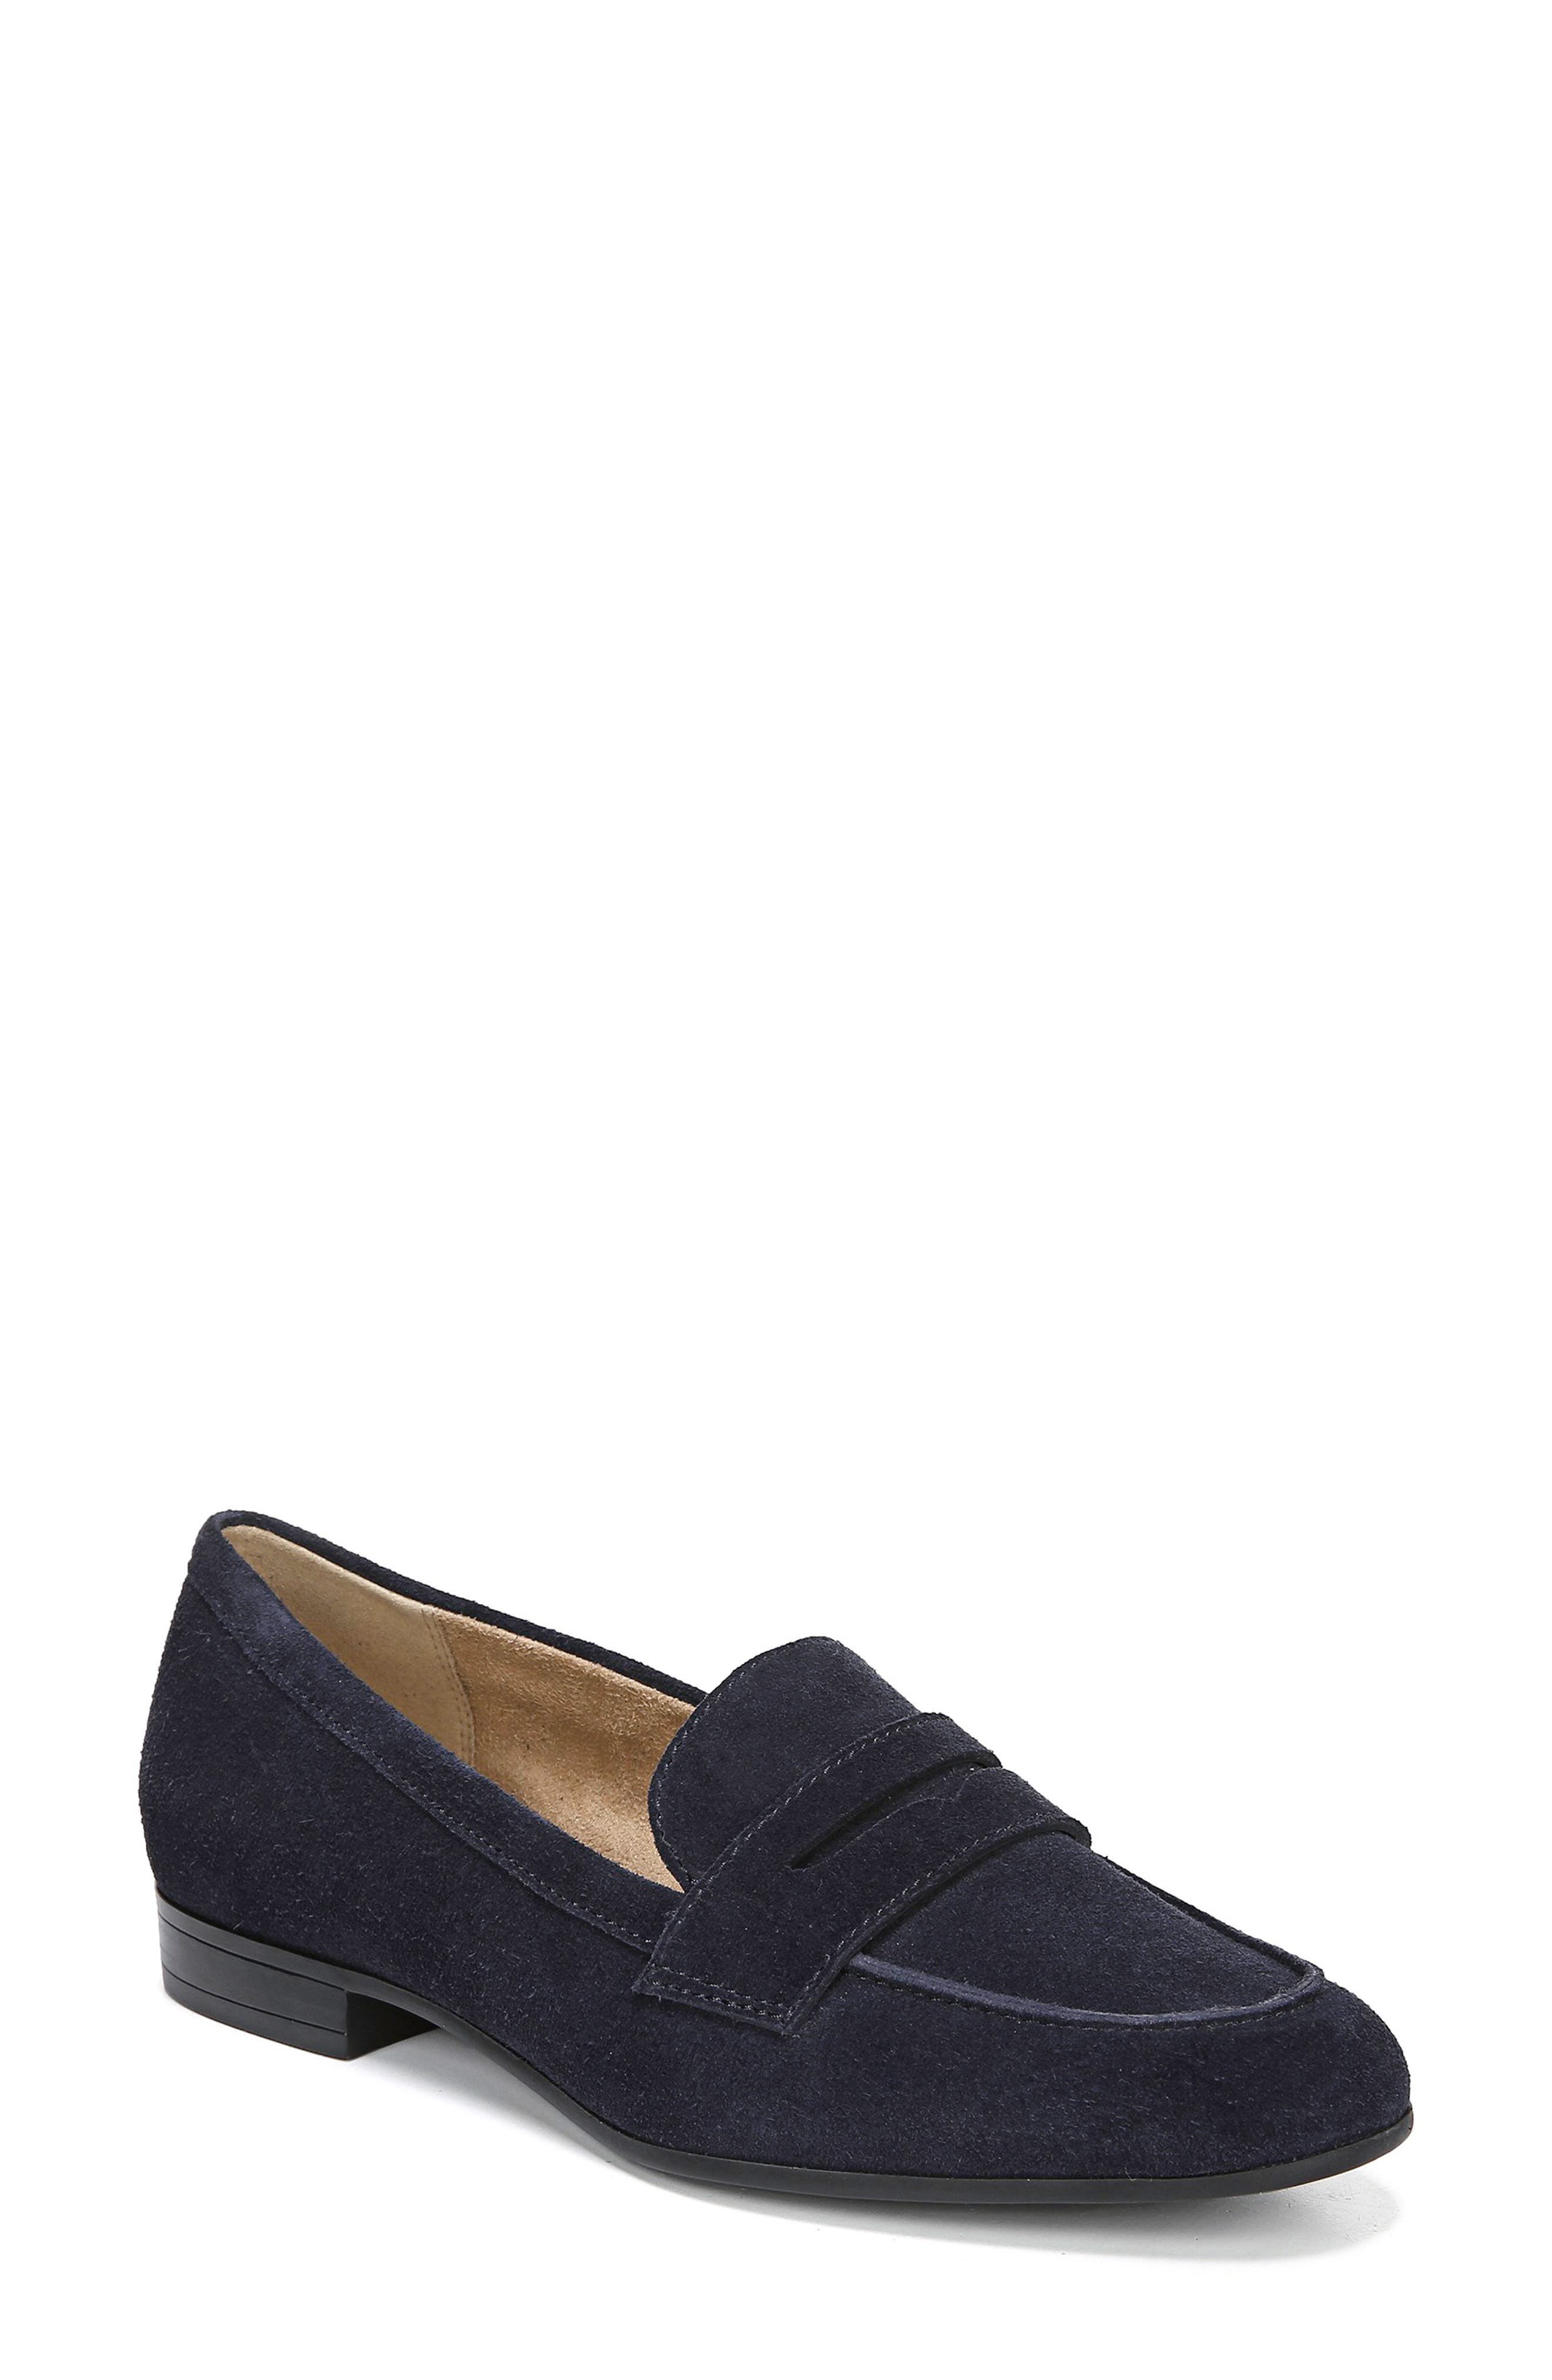 women's shoes loafers sale